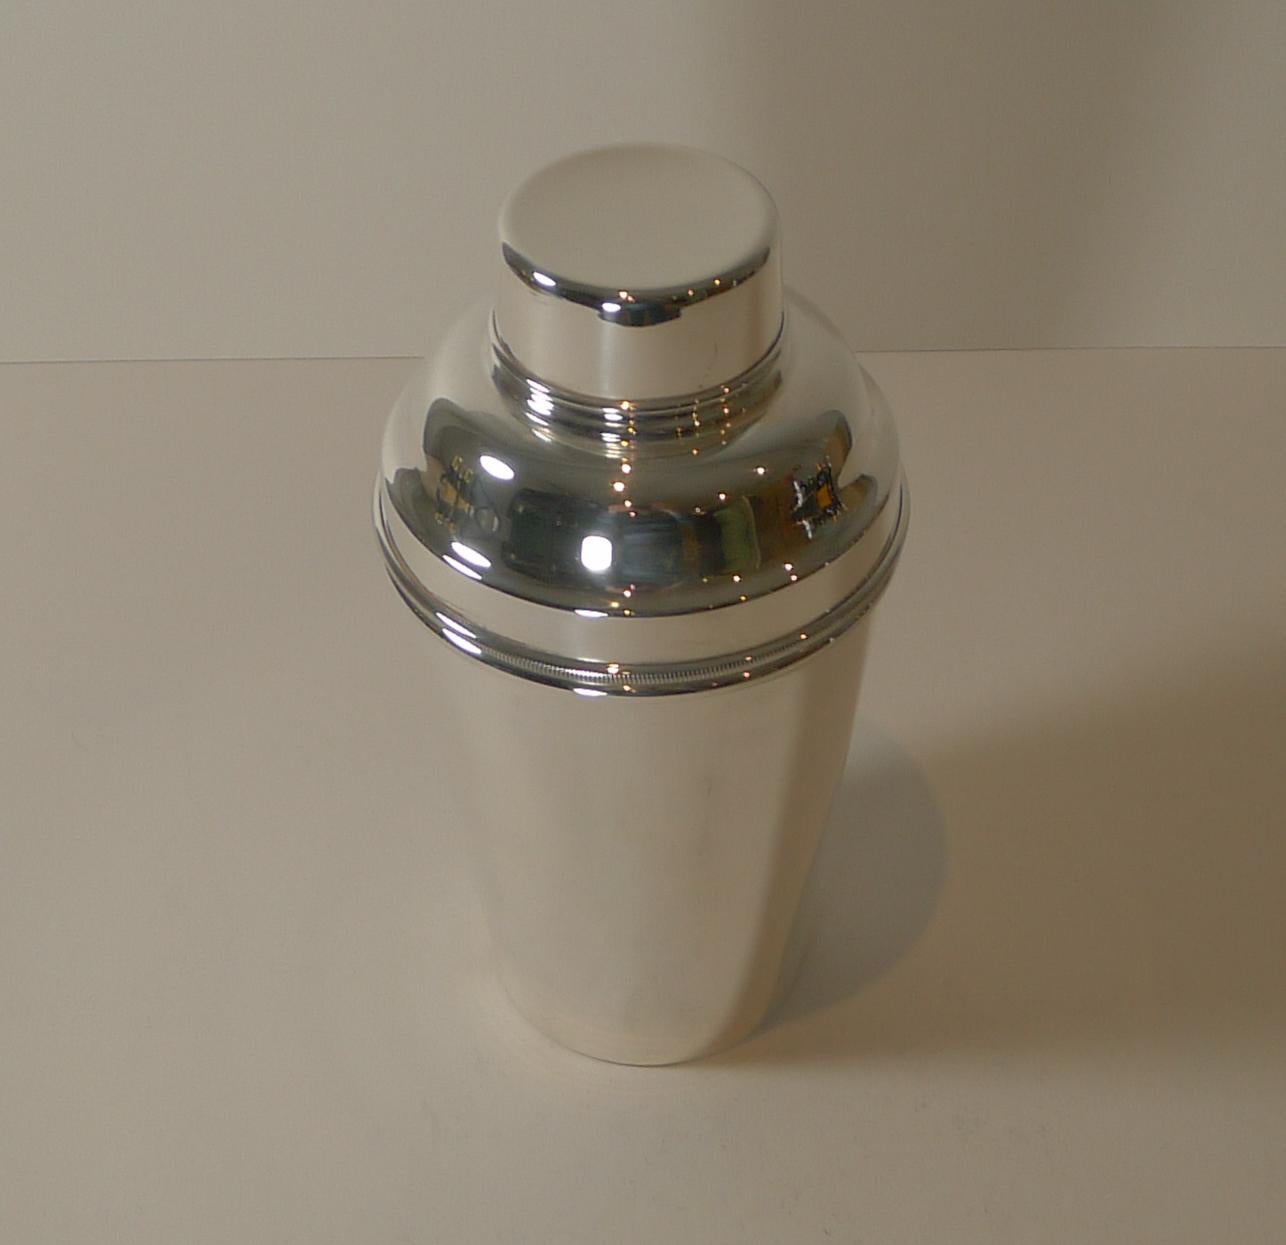 A striking large English Art Deco cocktail shaker, lovely heavy quality. 

Made from silver plate, it has just returned from our silversmith's workshop where it has been professionally cleaned and polished, restoring it to it's former glory;